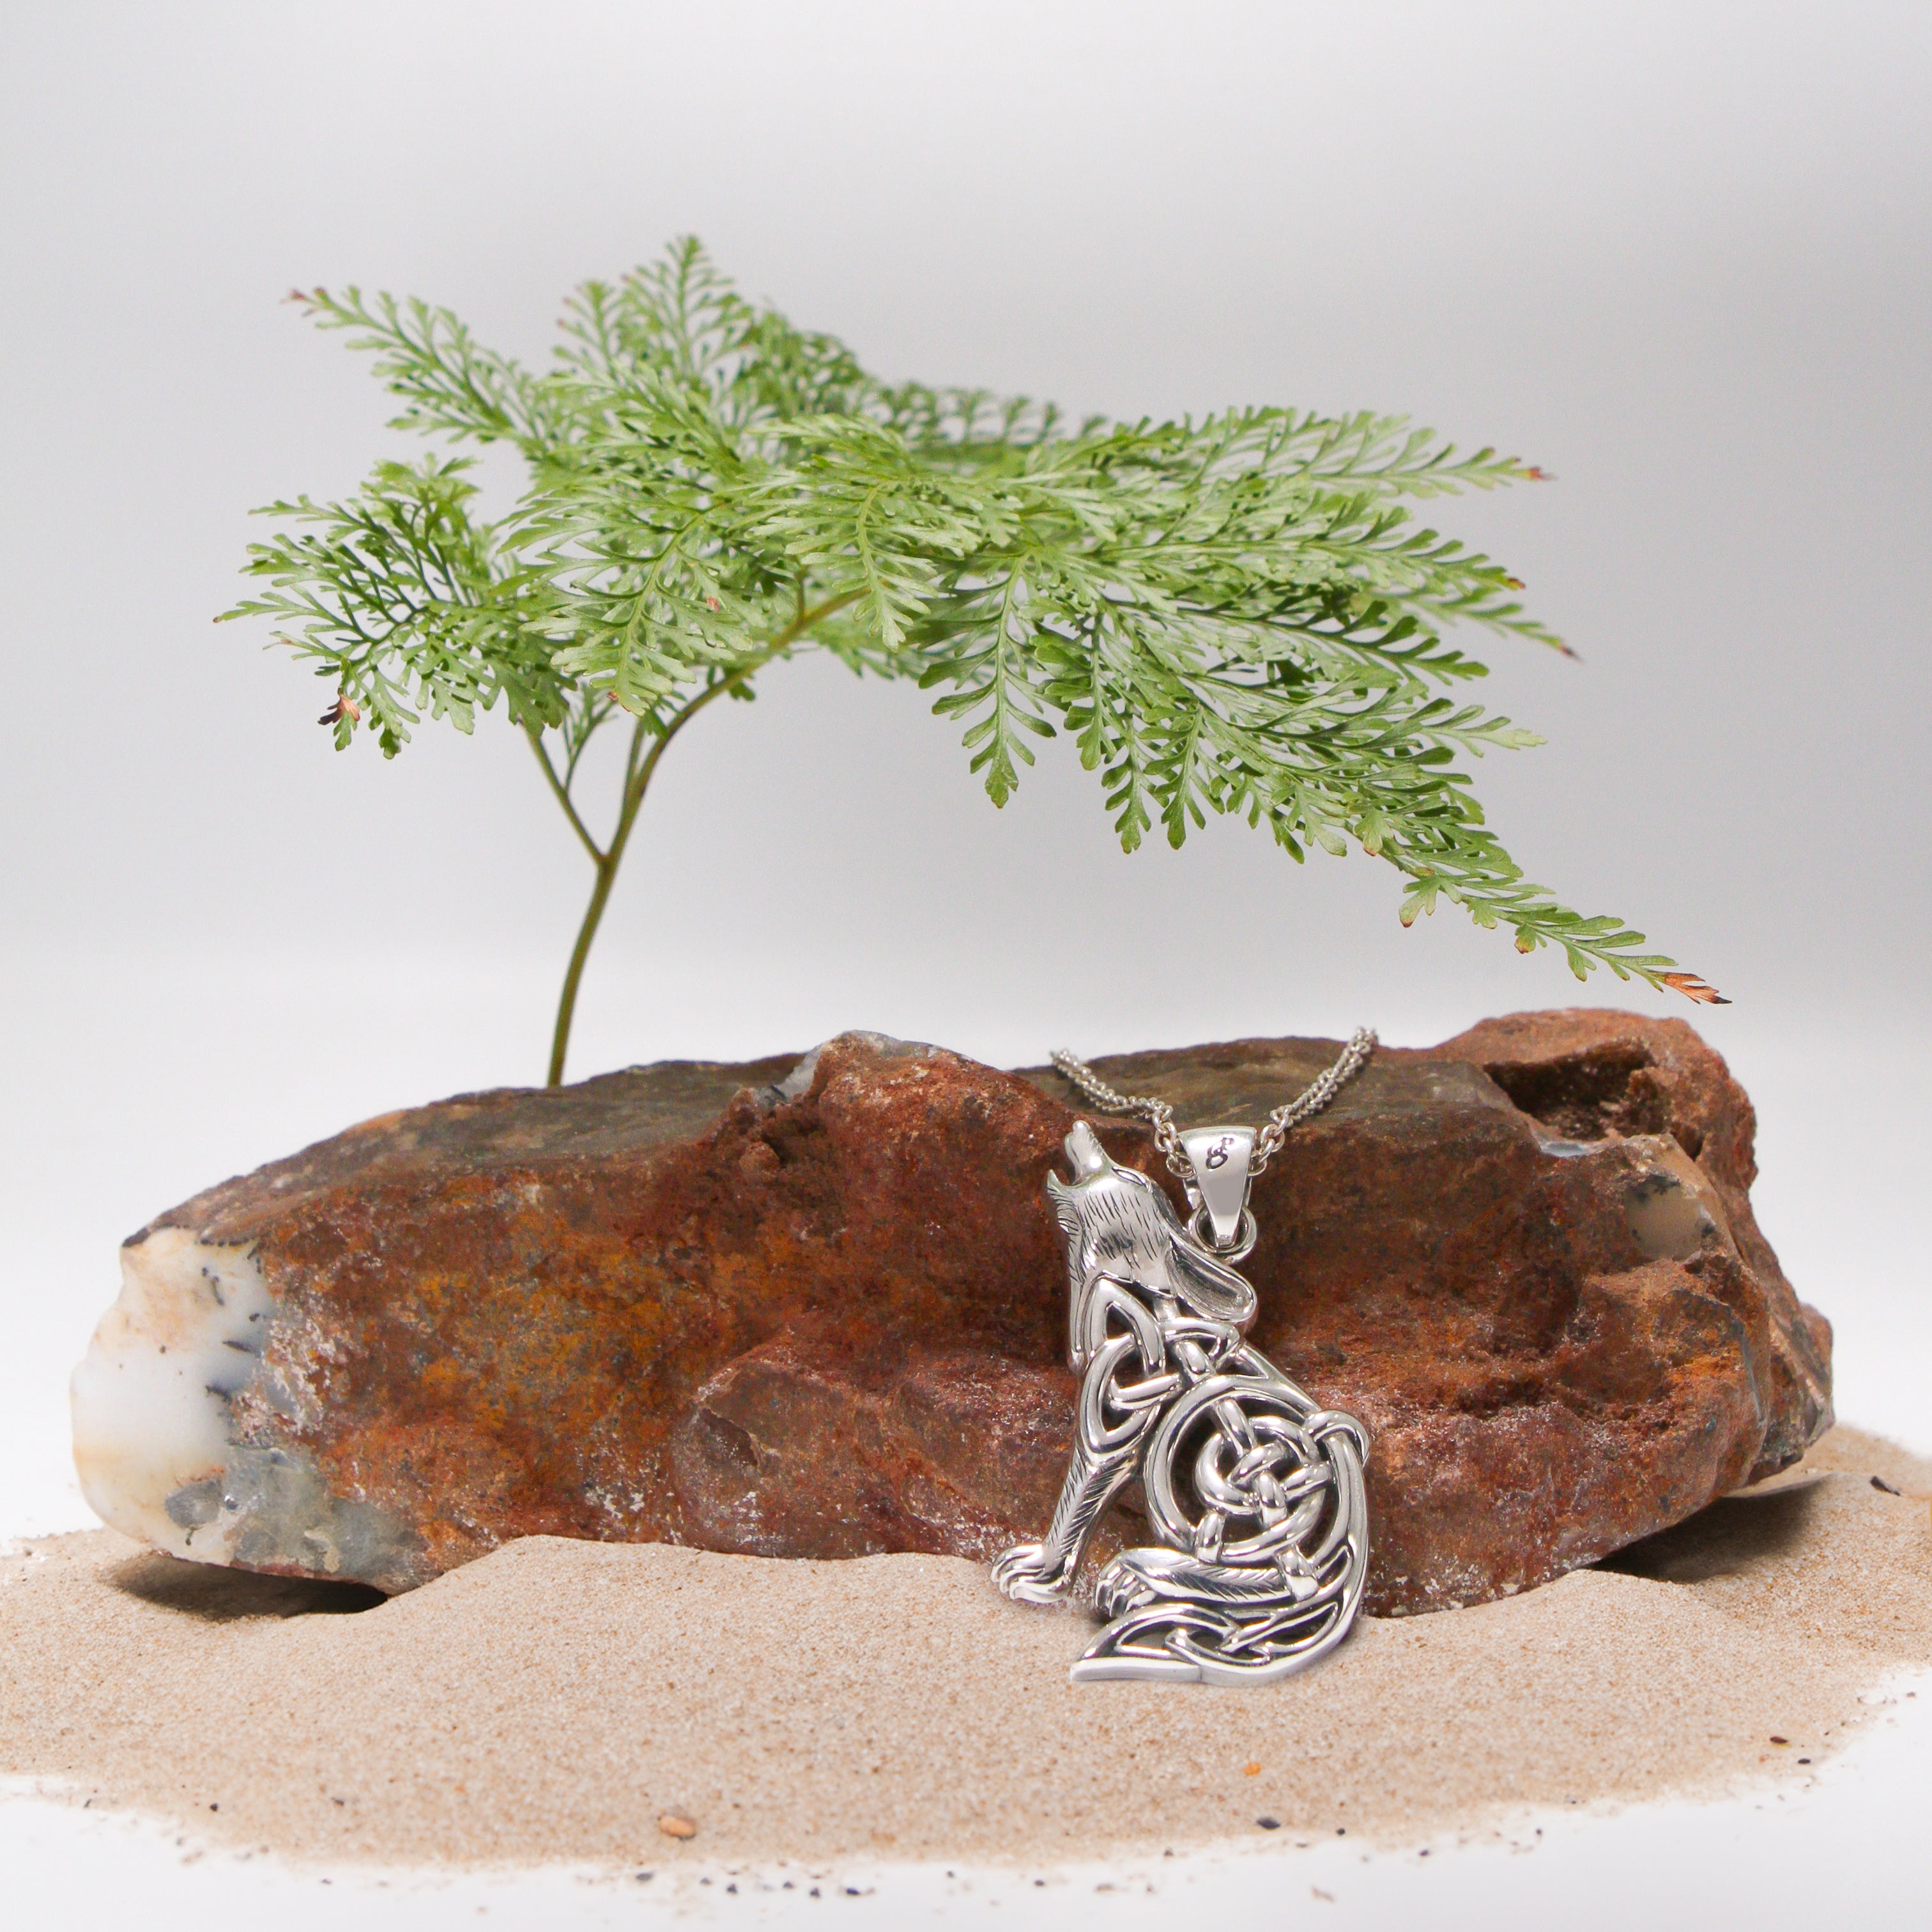 Celtic Spirit Howling Wolf Design for Unique Style Sterling Silver Pendant BY Peter Stone Jewelry TPD6138